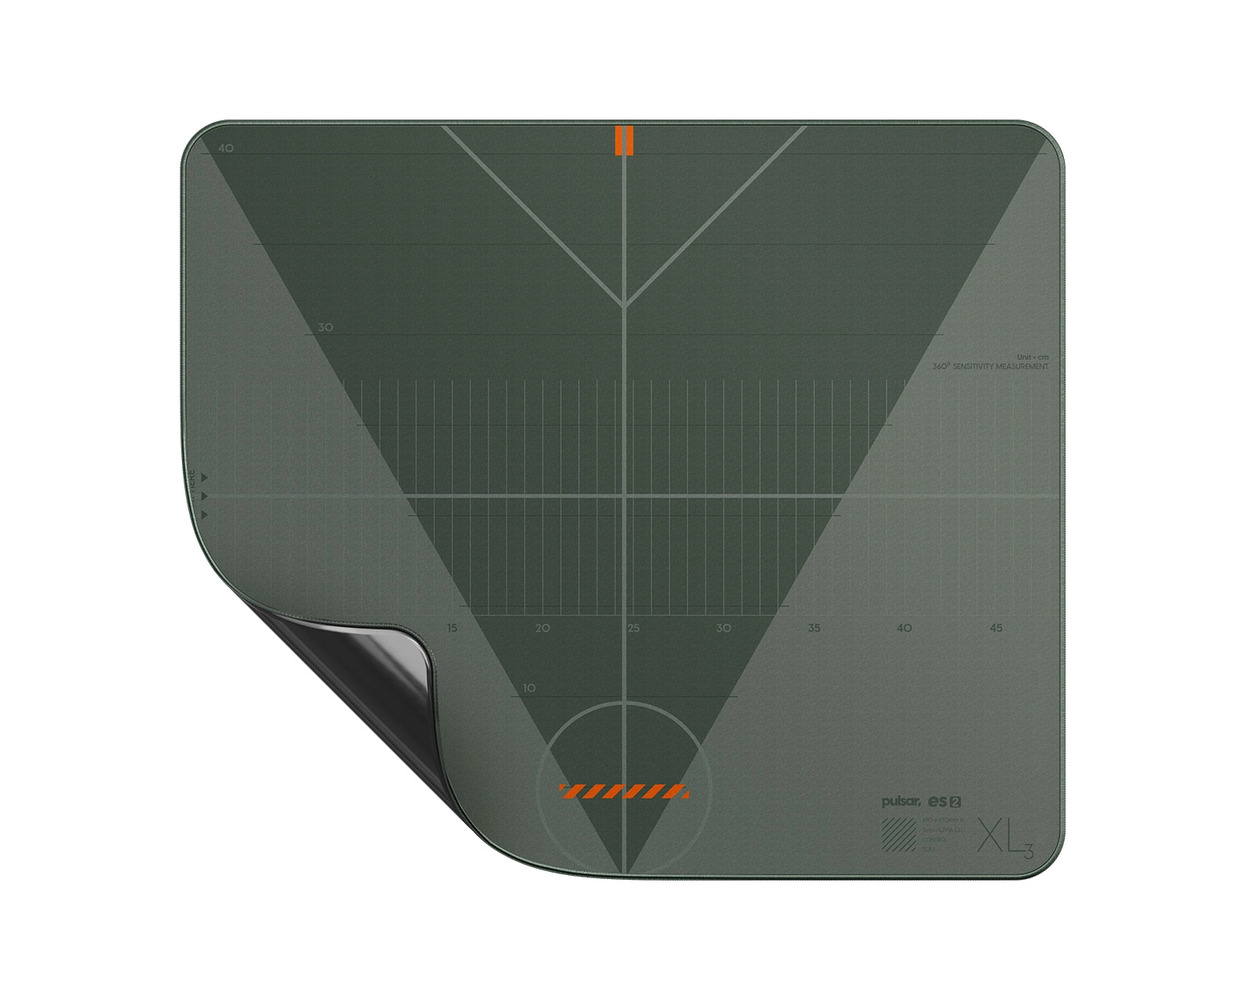 Pulsar ES2 Gaming Mousepad - Aim Trainer Limited Edition 2